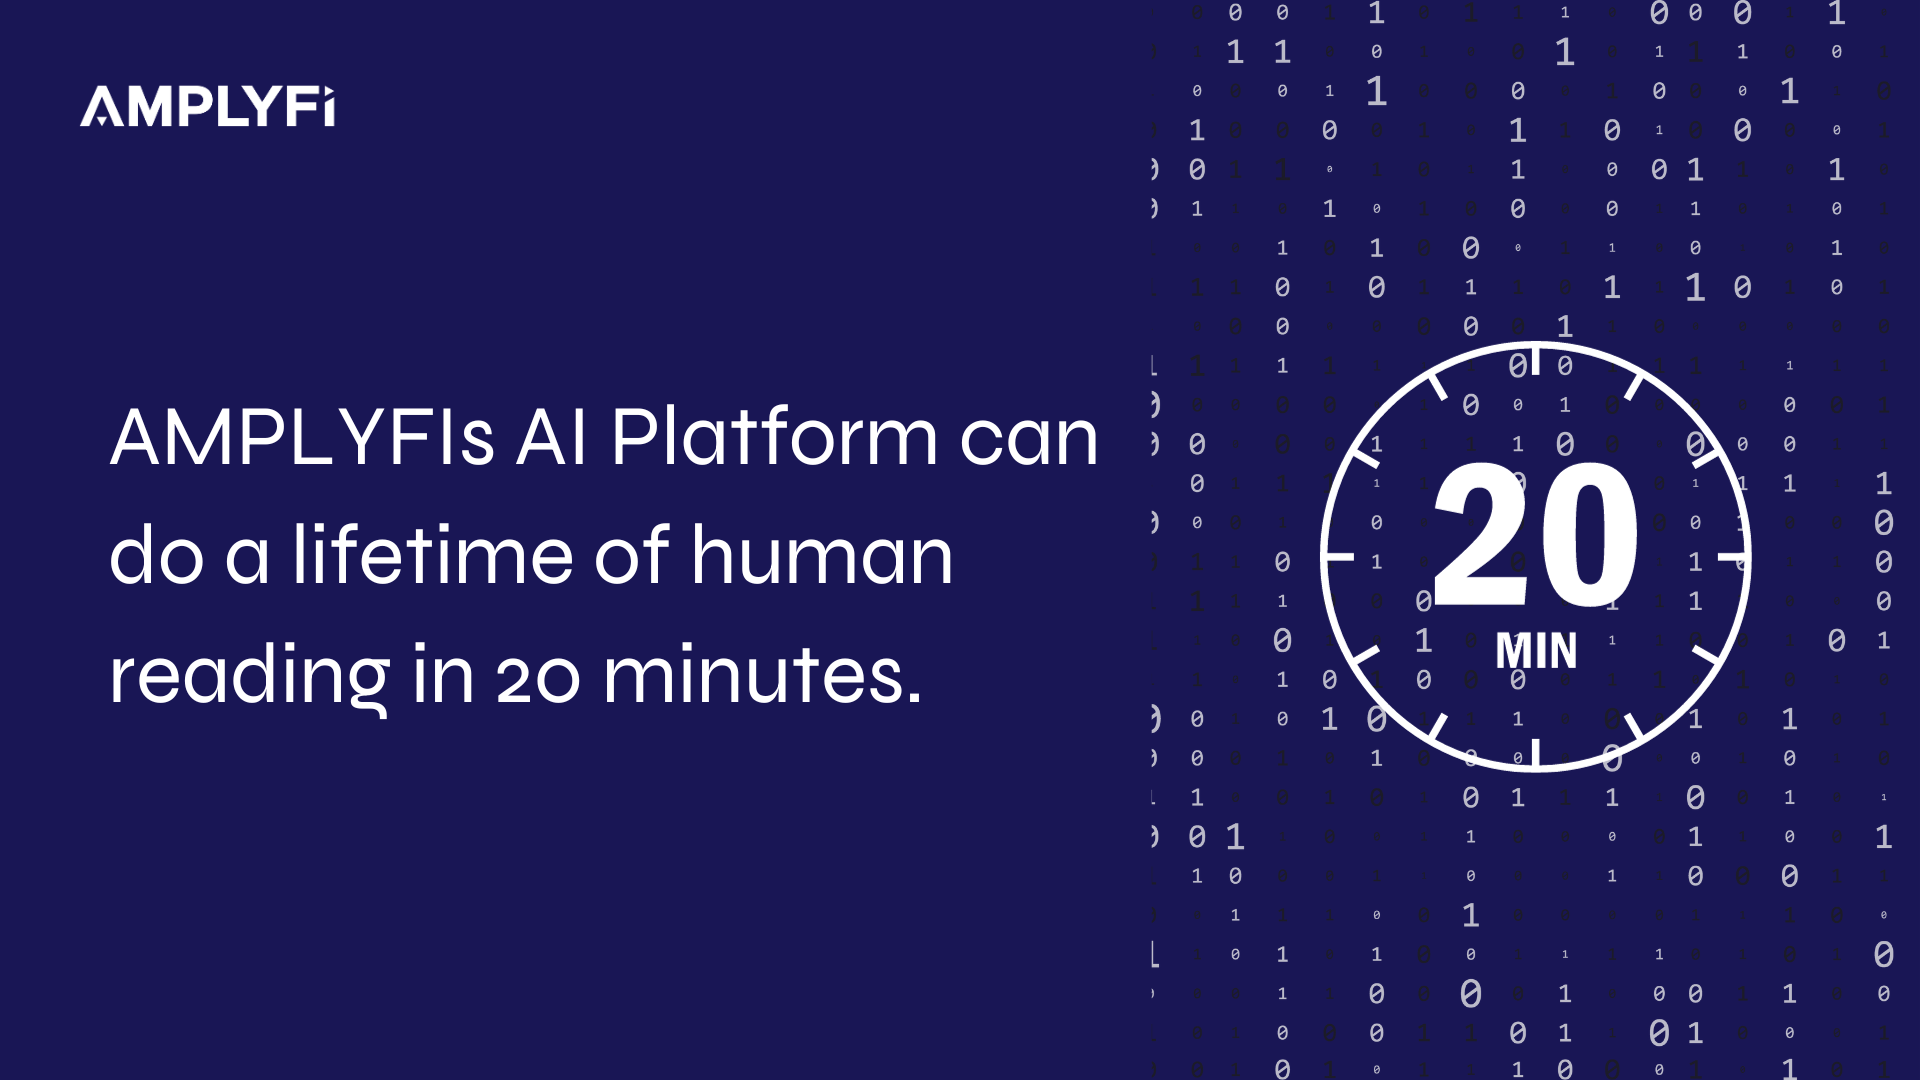 AMPLYFIs AI Platform can do a lifetime of human reading in 20 minutes.